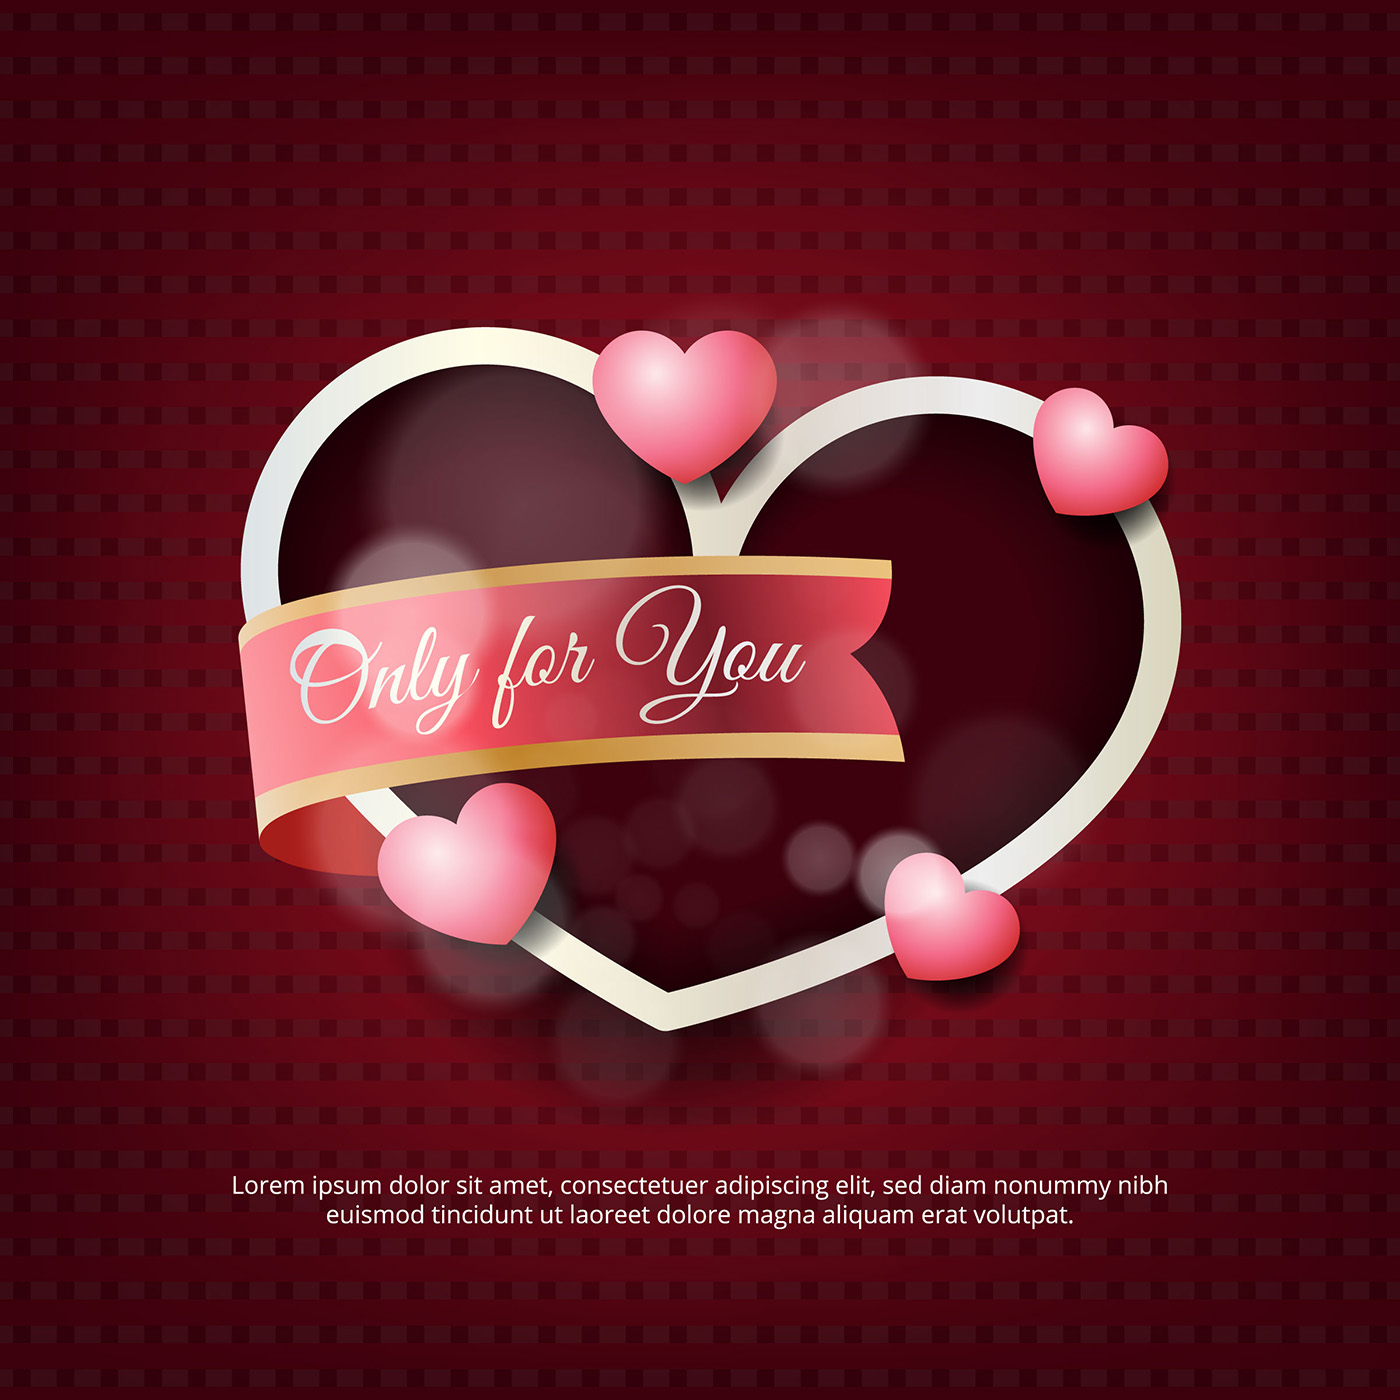 Realistic valentine's day background - Download Free Vector Art, Stock Graphics & Images